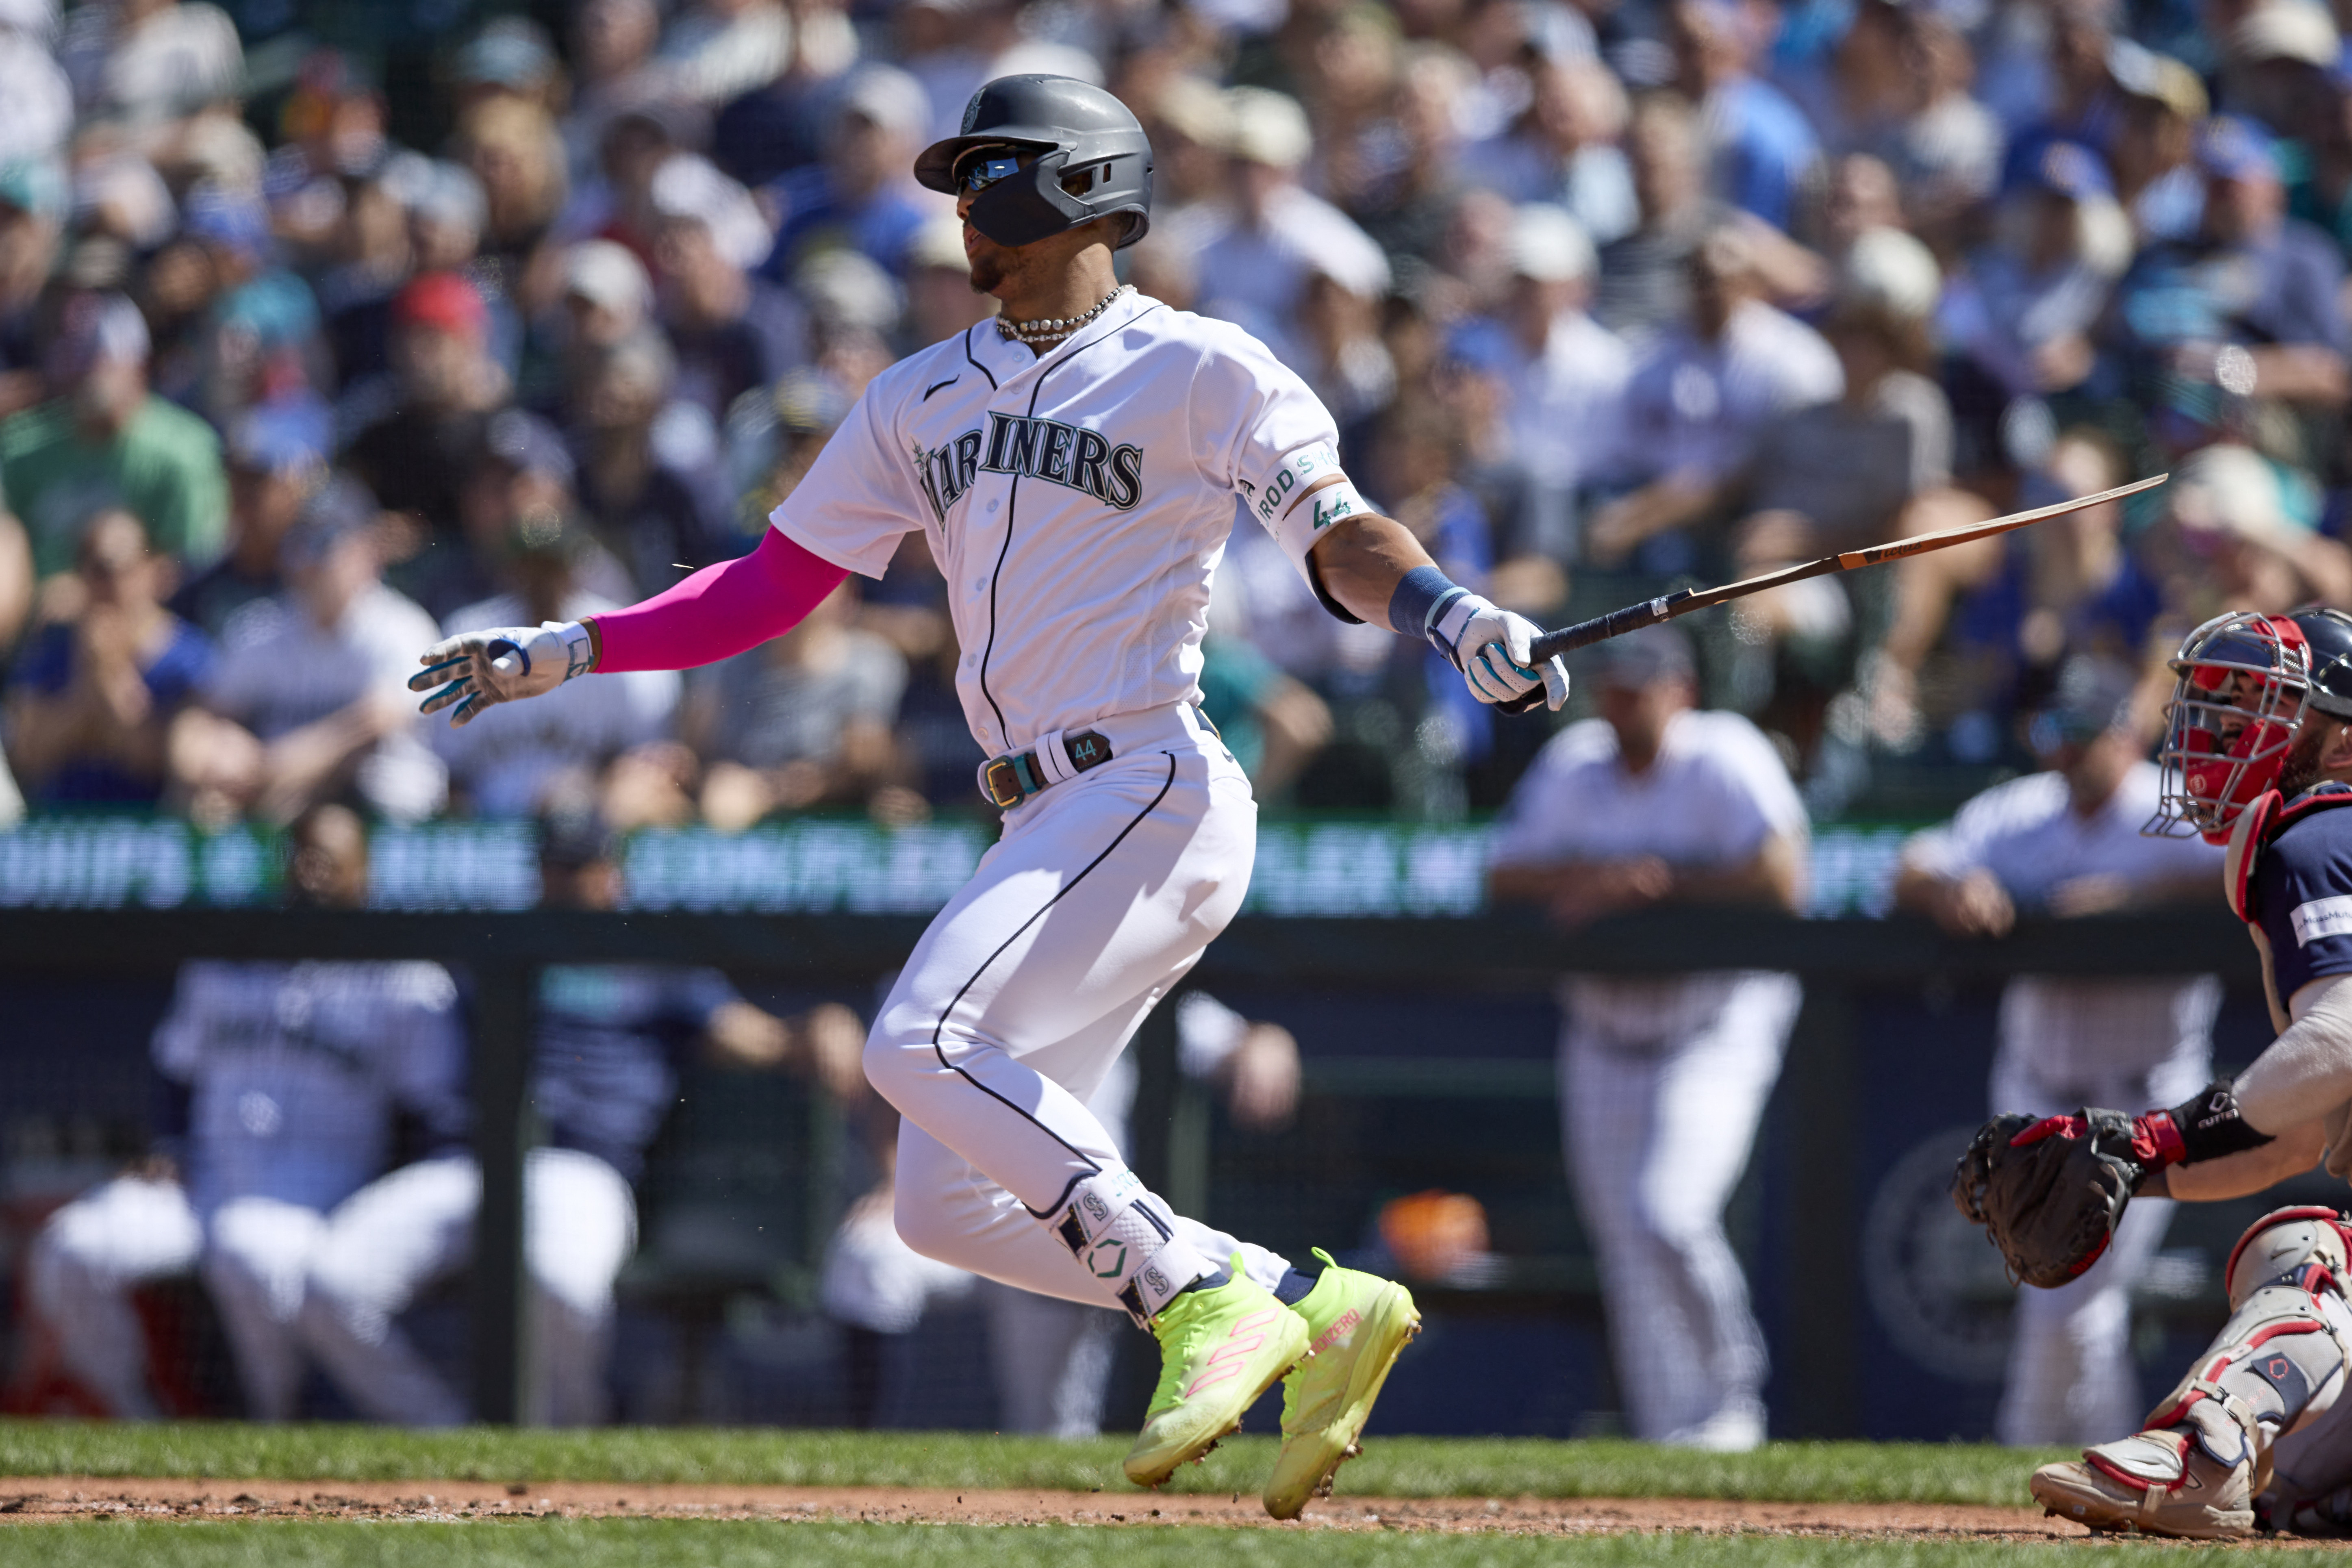 Mariners score seven runs on three hits to beat Red Sox in 10